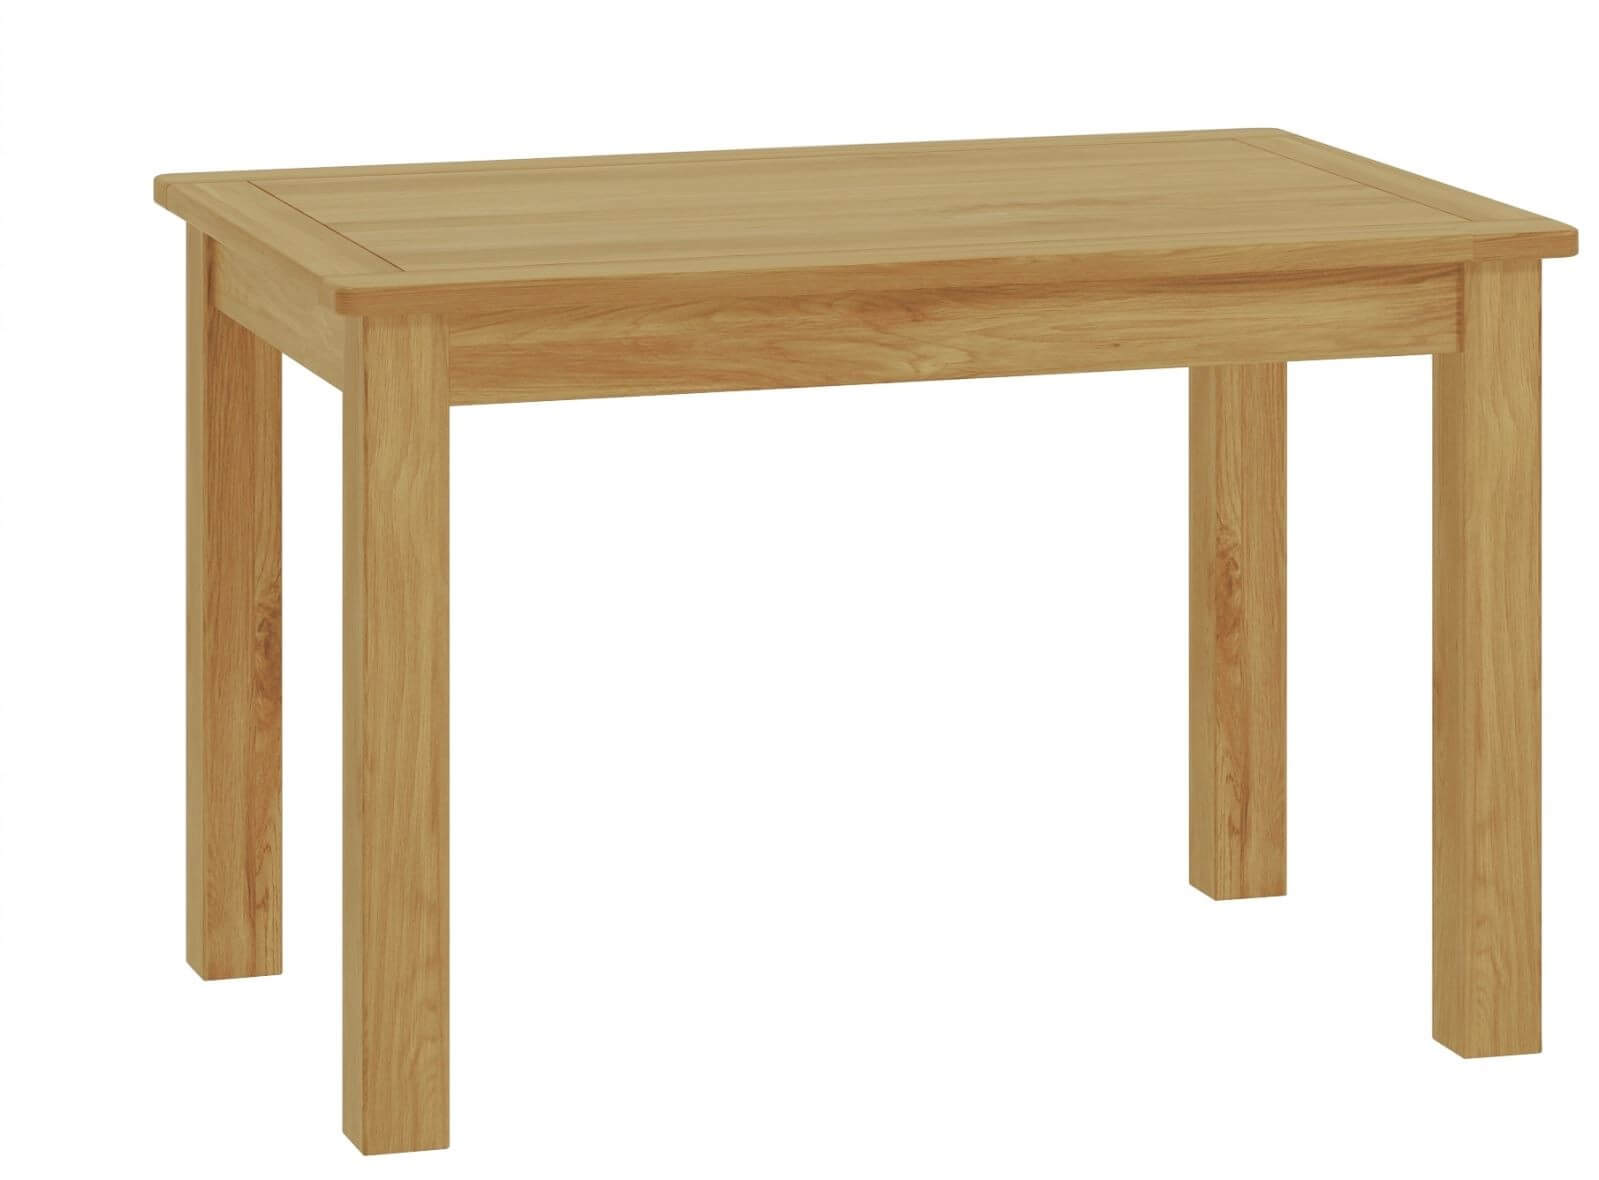 Showing image for Seattle dining table - fixed top